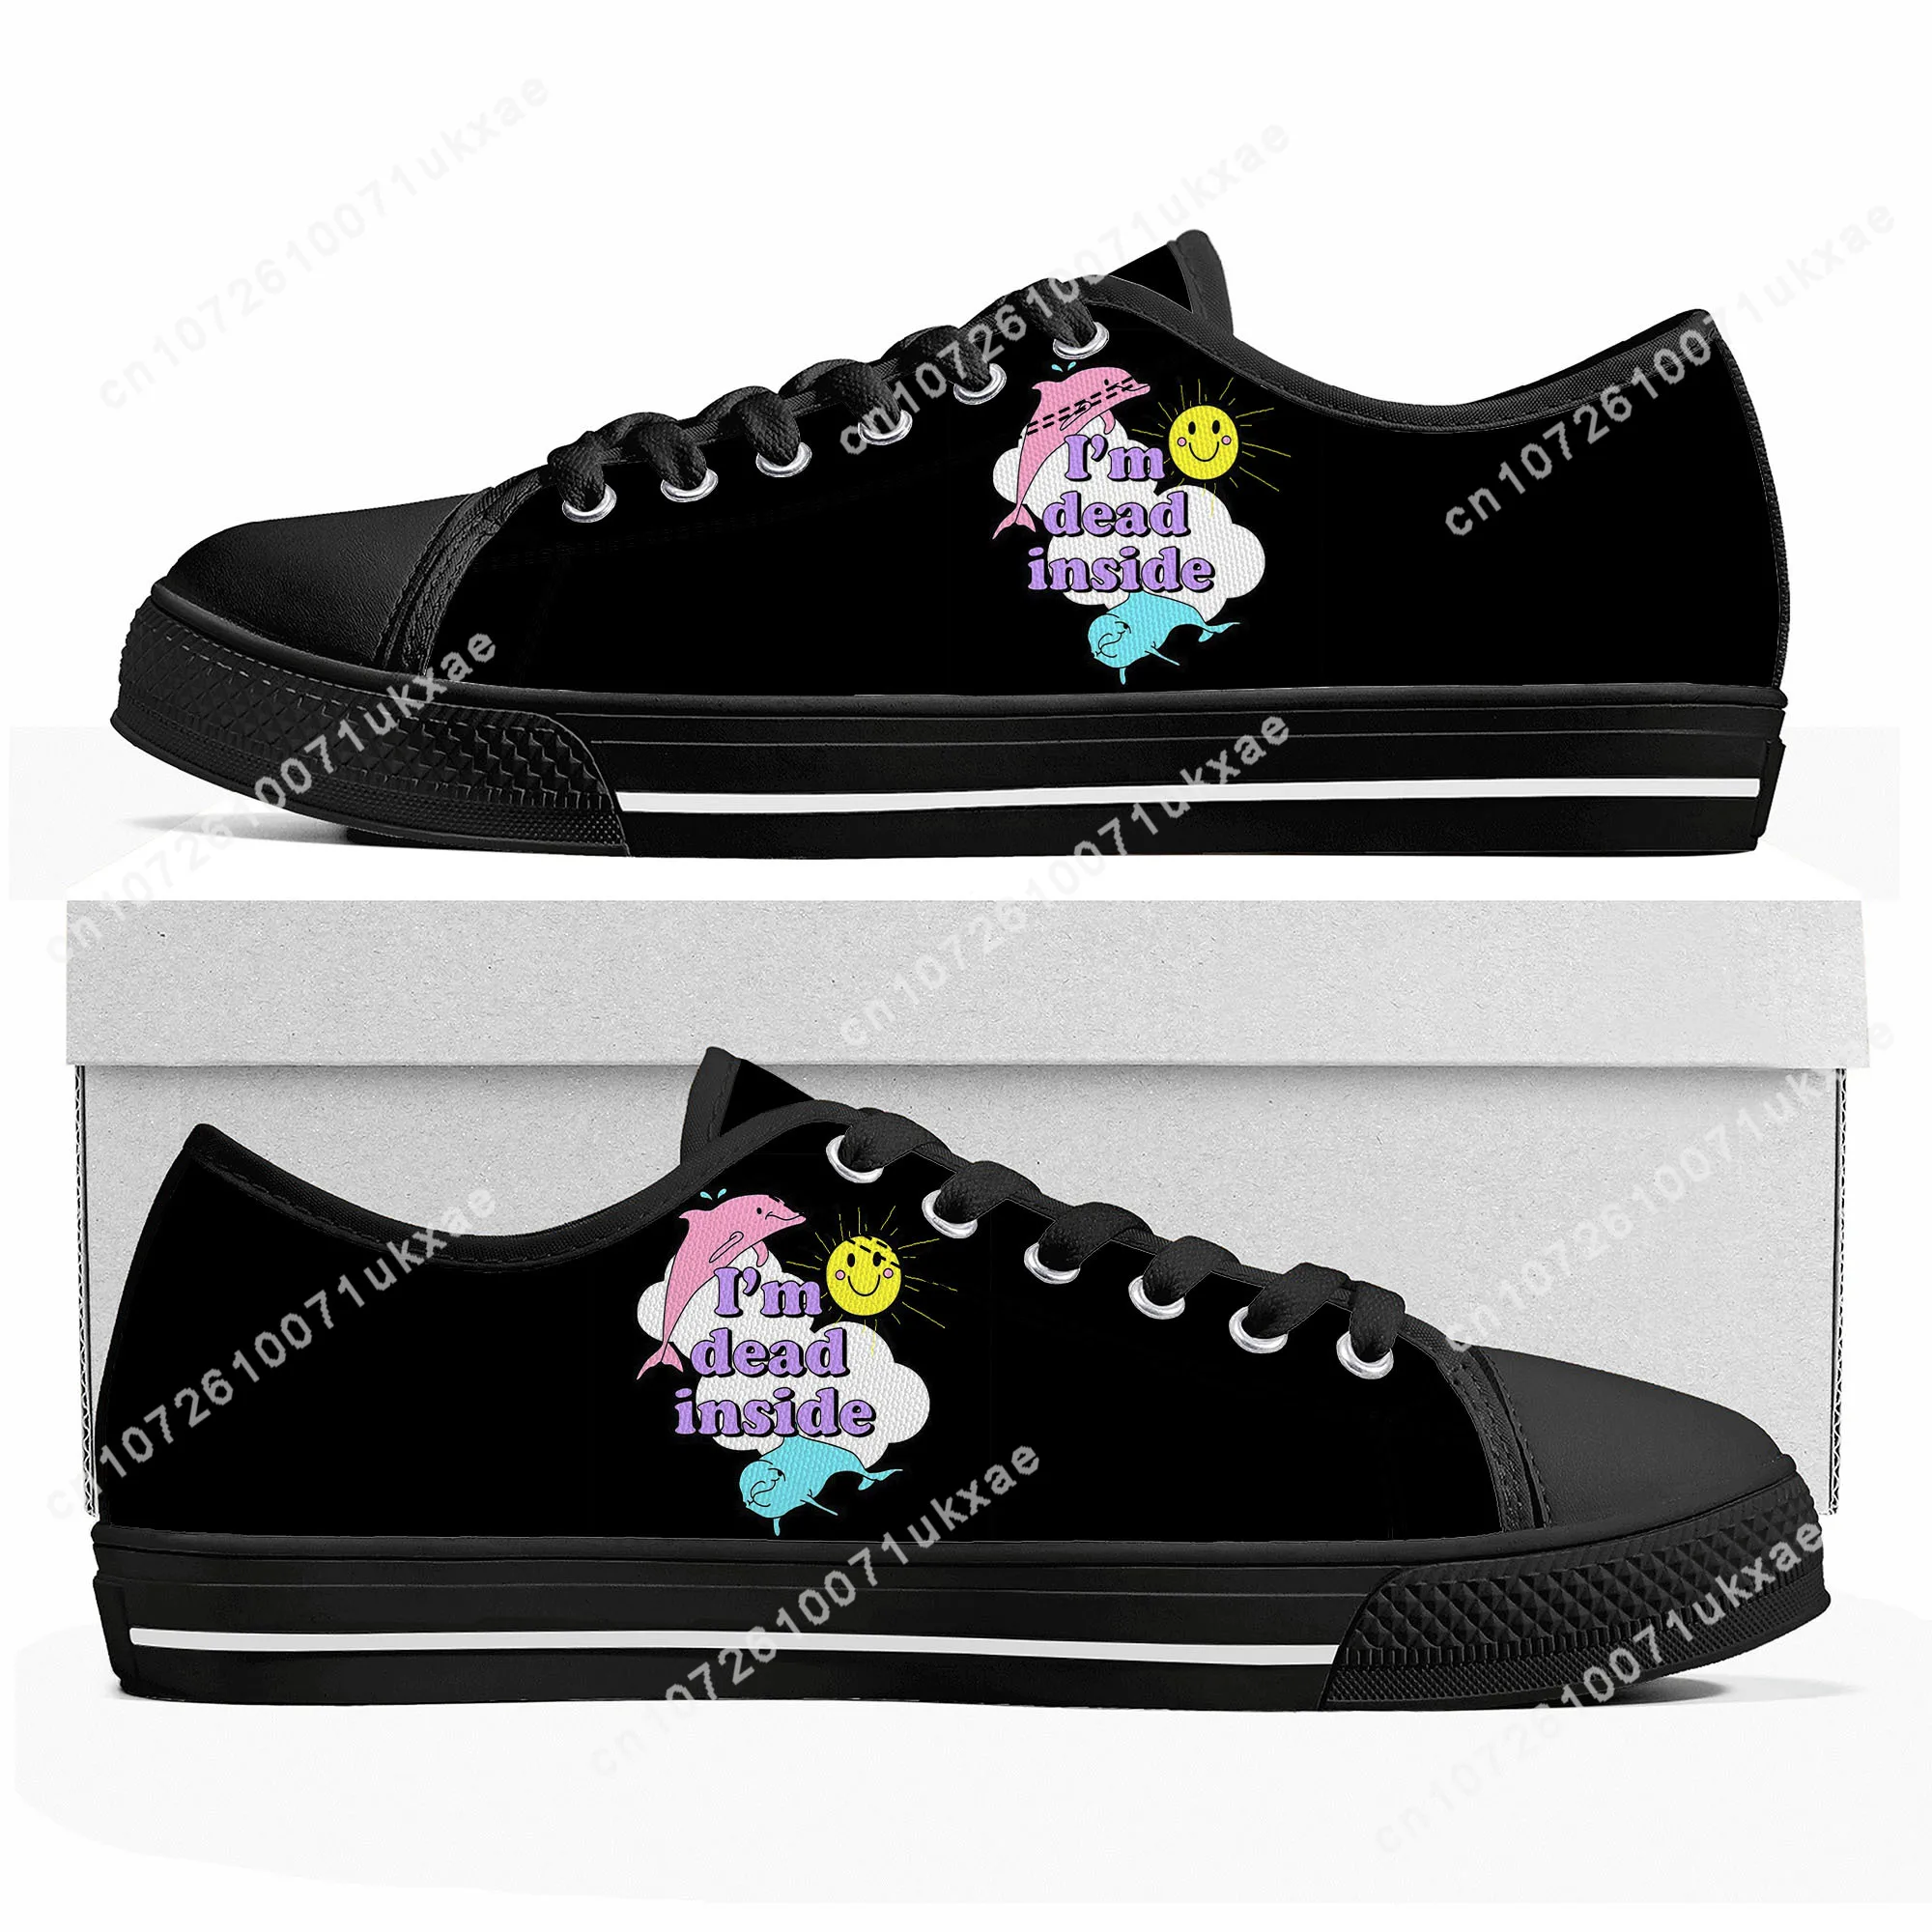 

Dolphin IM Dead Inside Sunshine Low Top Sneakers Mens Womens Teenager Canvas Sneaker Casual Custom Made Shoes Customize Shoe